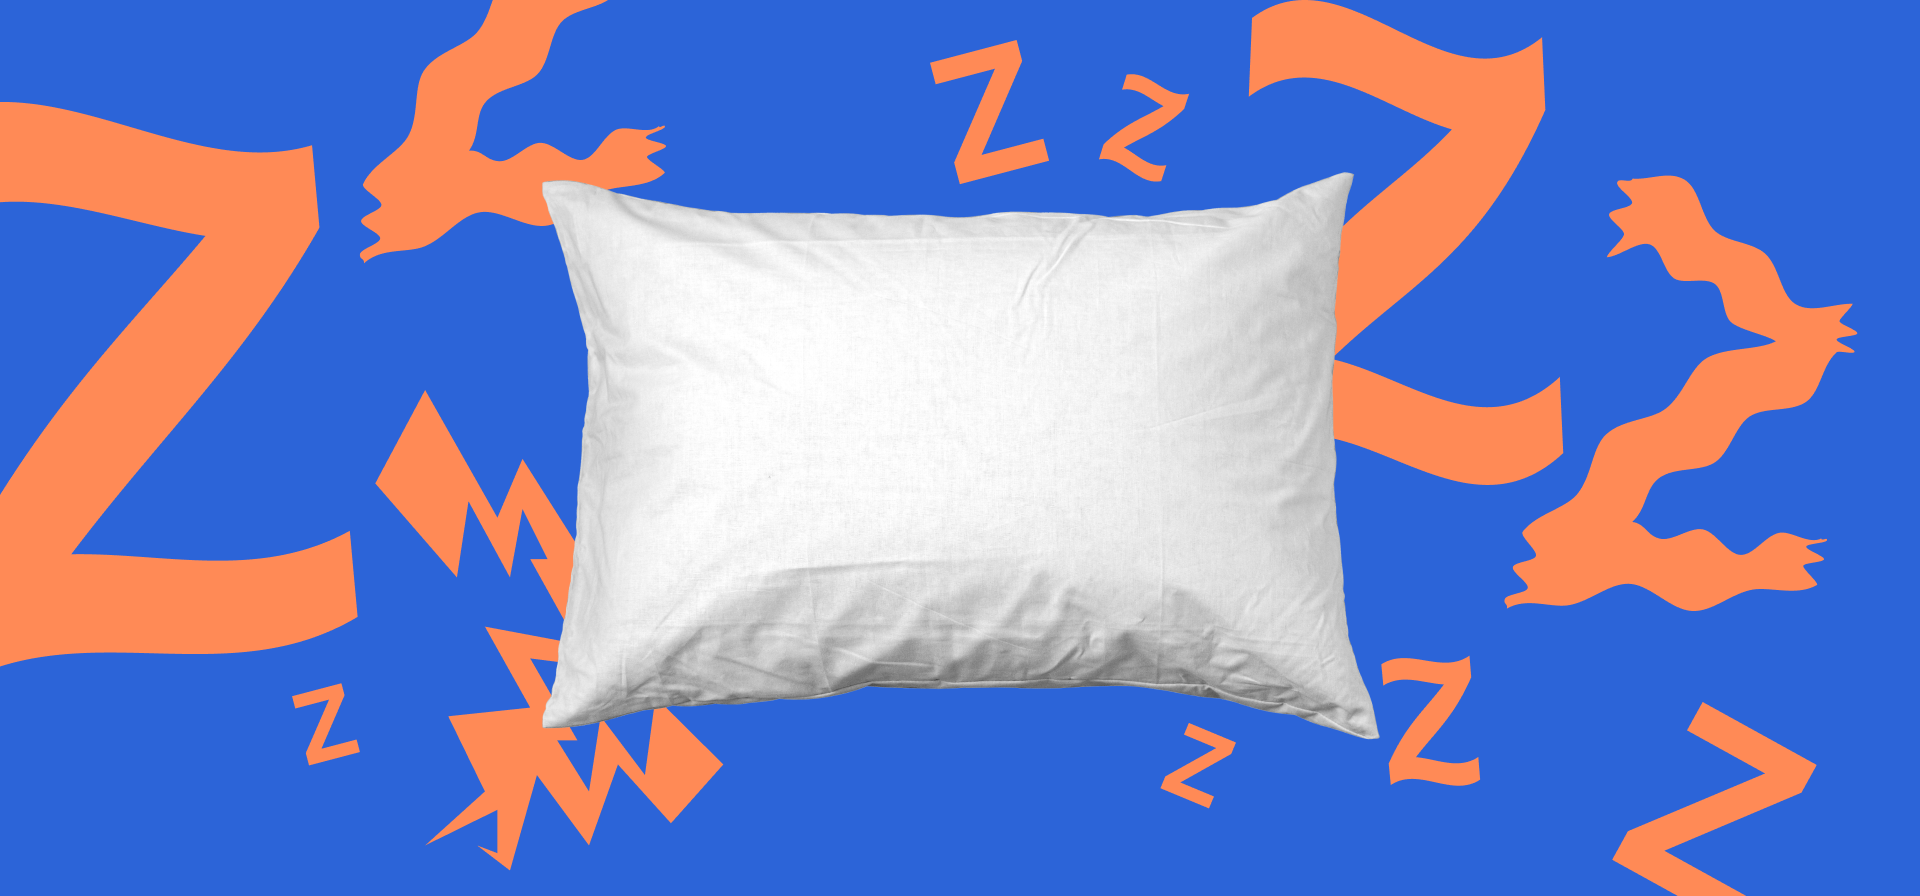 Everything You've Ever Wanted to Know About Snoring - Explainers